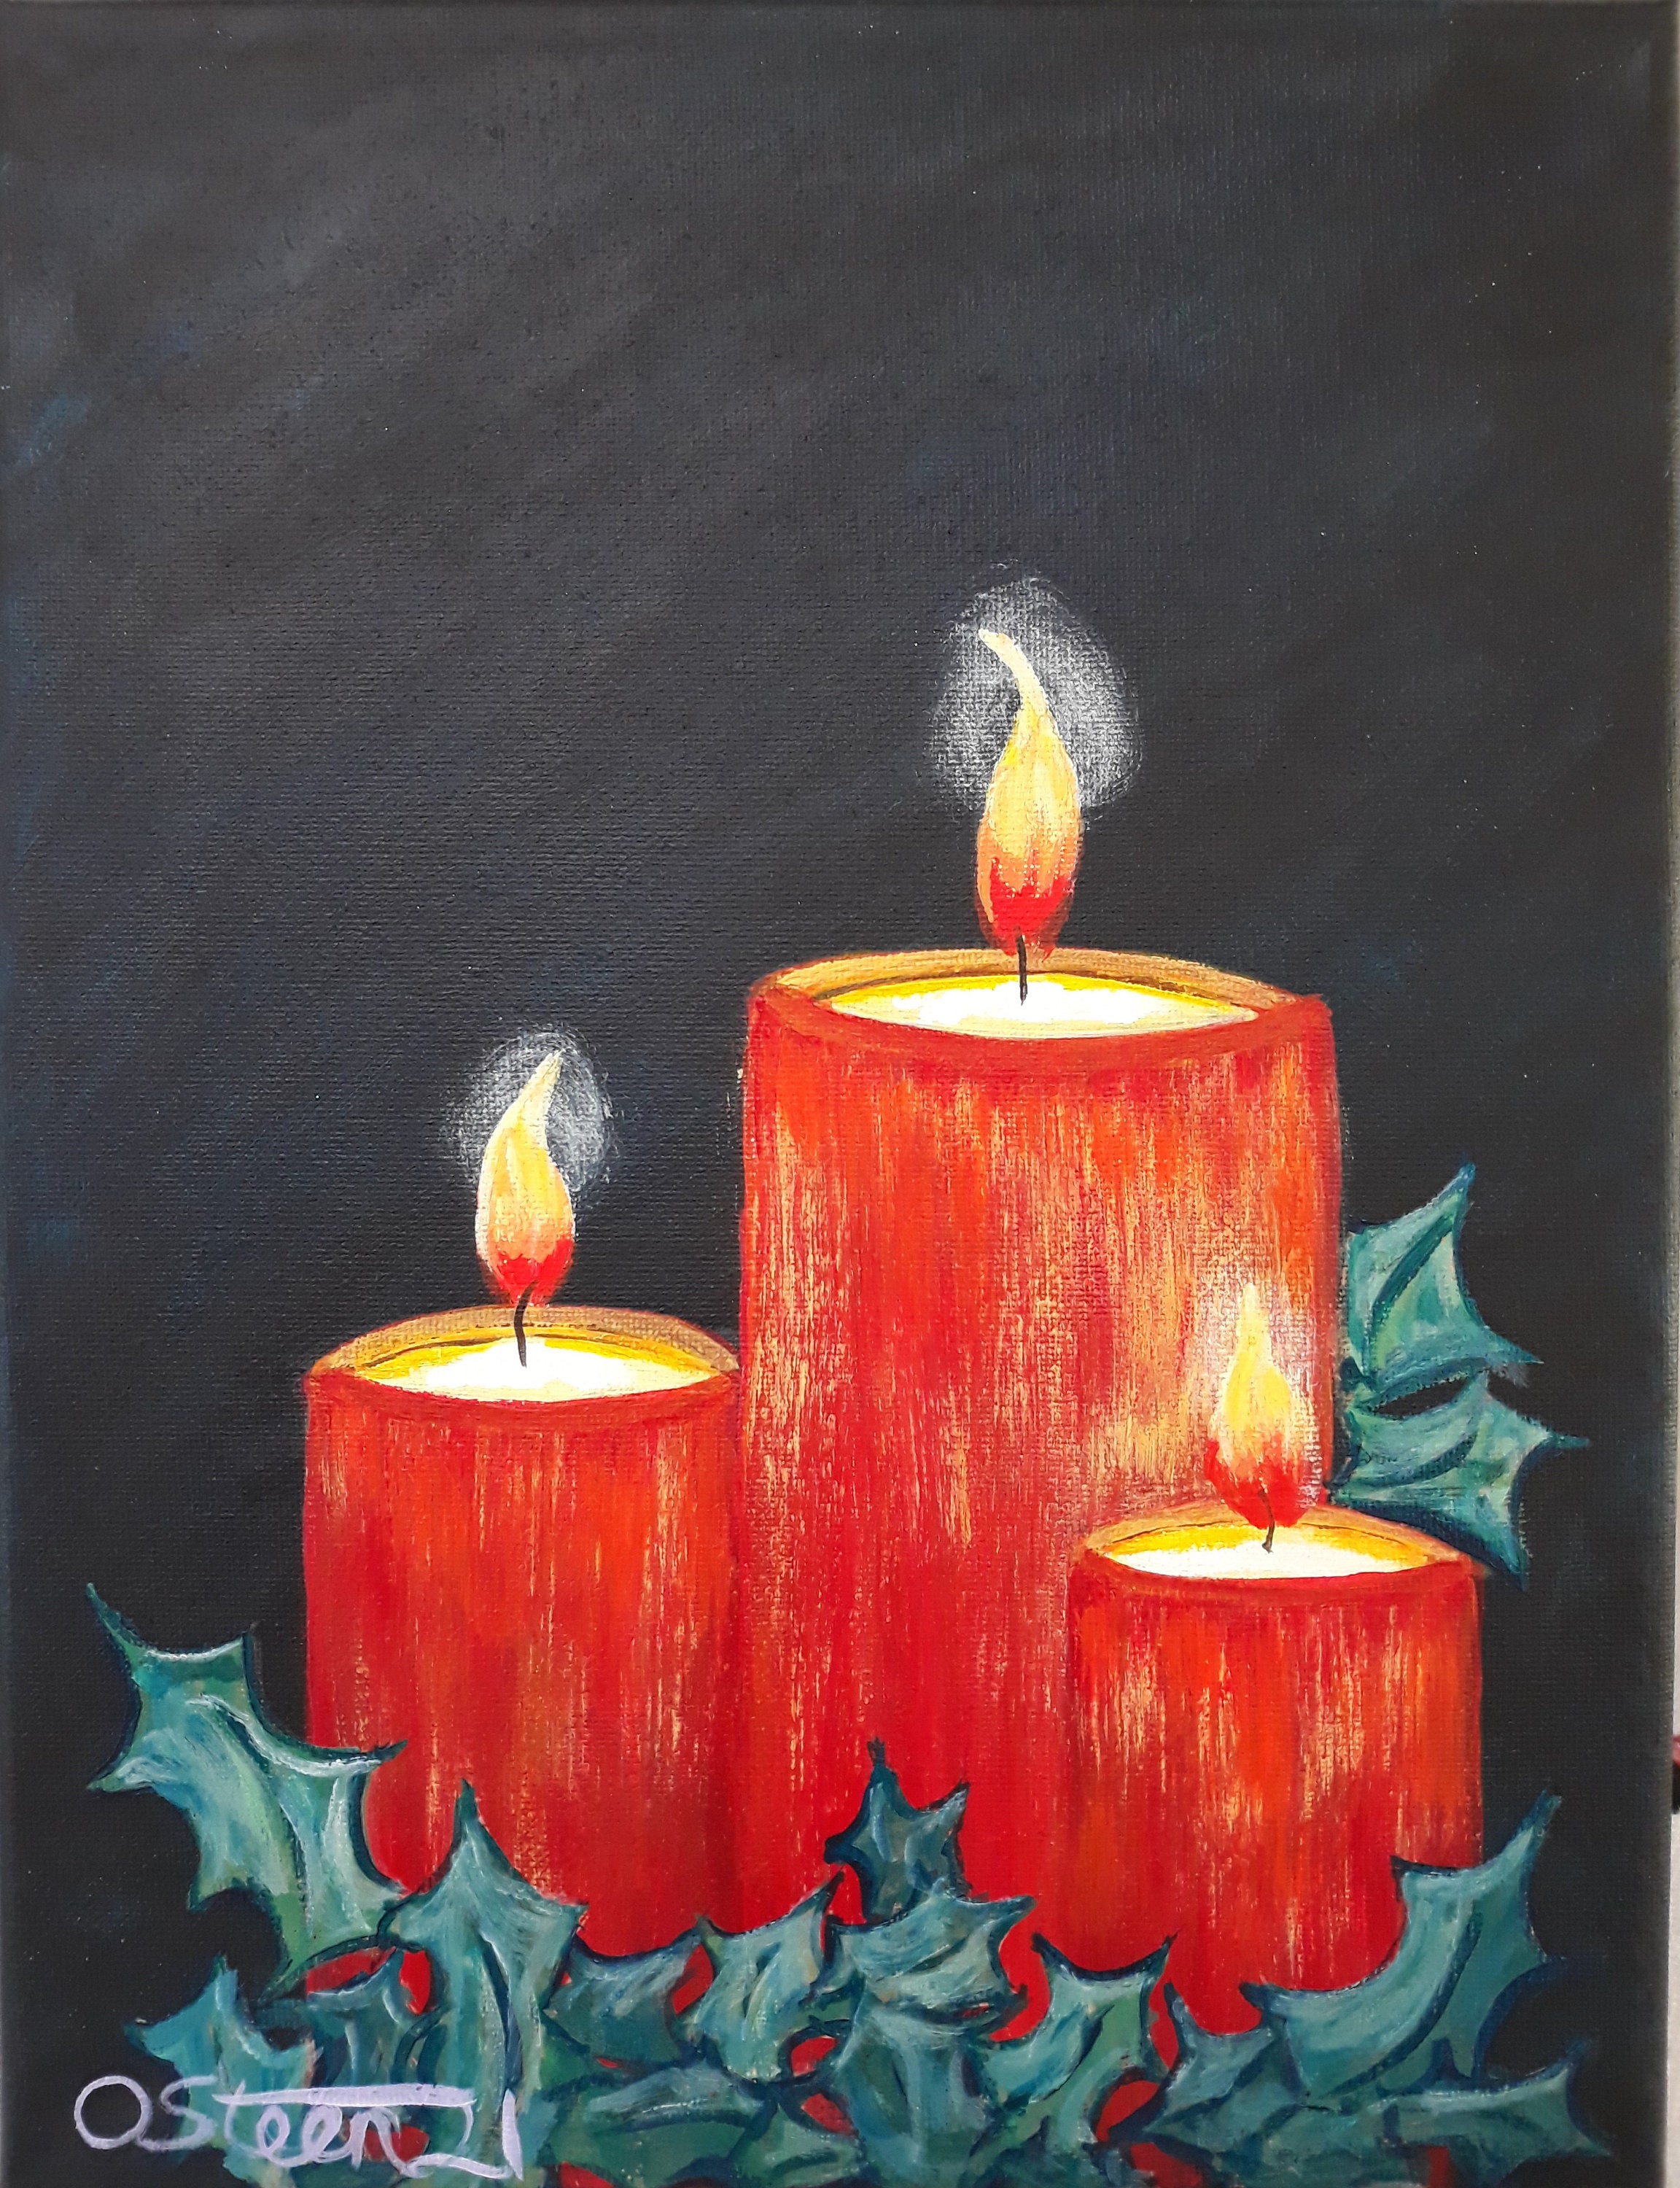 How To Paint Christmas Candles - Acrylic Painting Tutorial